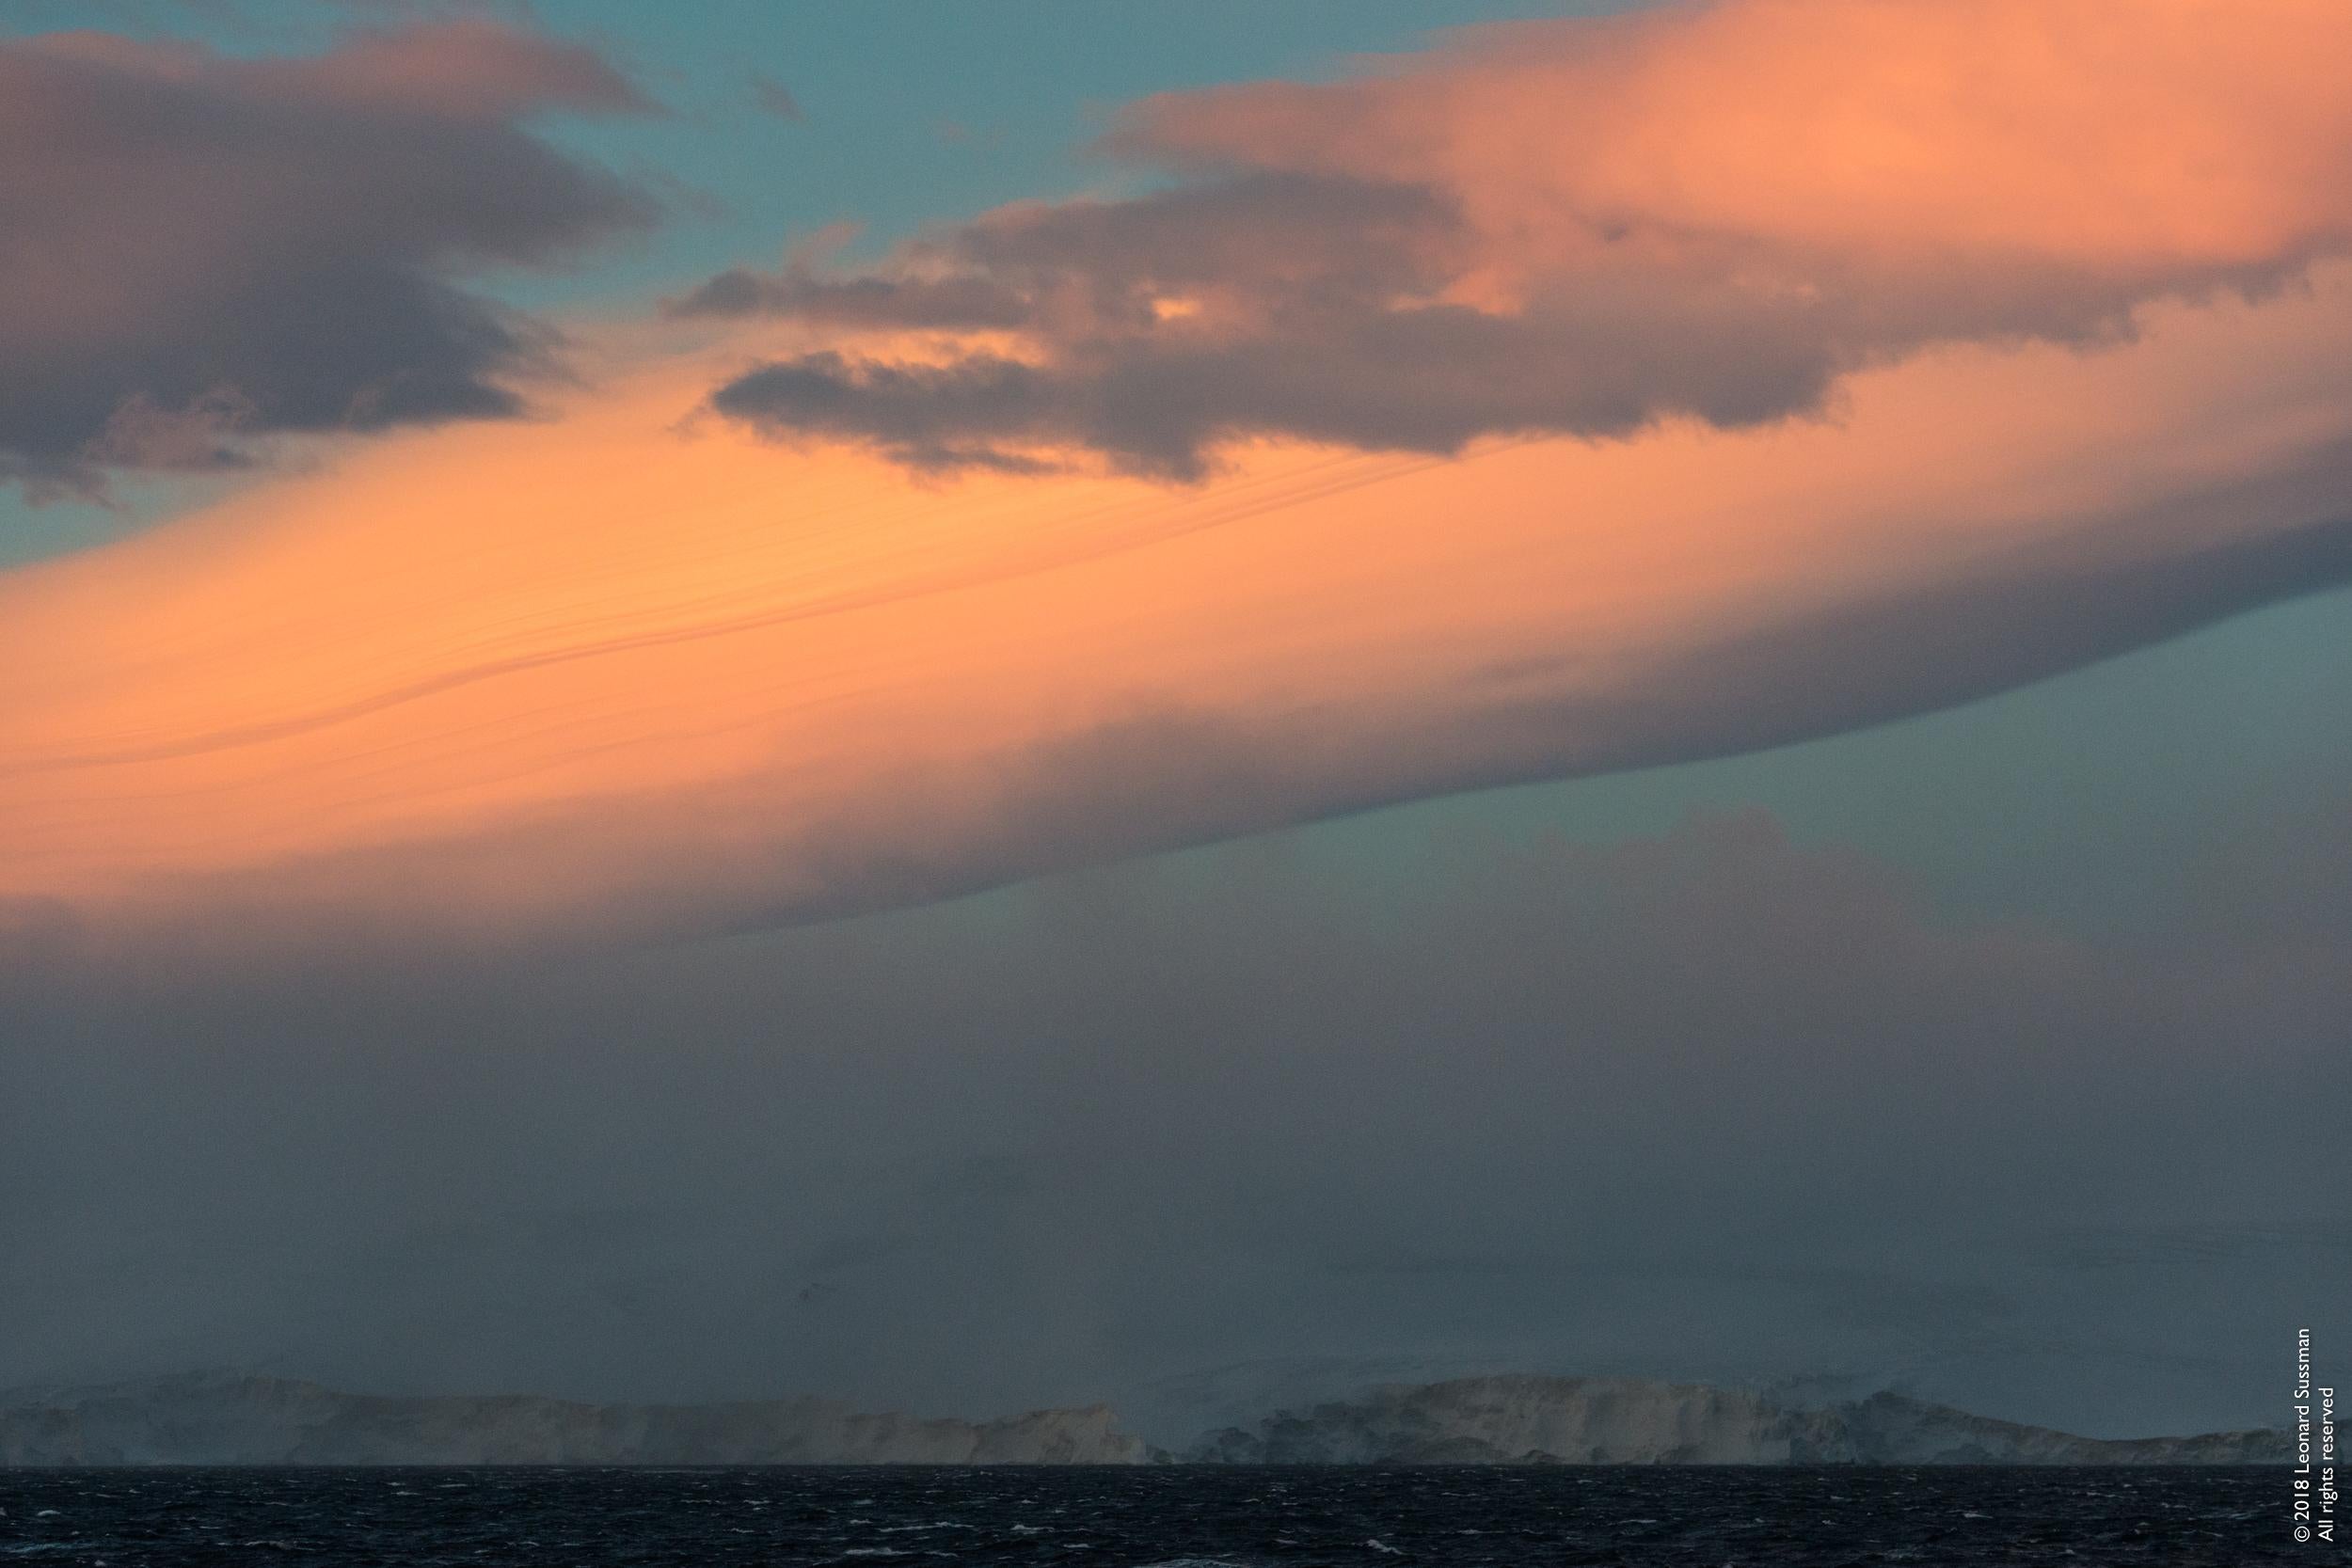 From the artist:

"ANTARCTIC SOUND, LAT. 63°35’S, LONG. 55°47’W, High Winds

I have never seen a more amazing sunrise than this one as we entered Antarctica. We were fortunate not to find the area blocked by sea-ice. We were told by the captain that